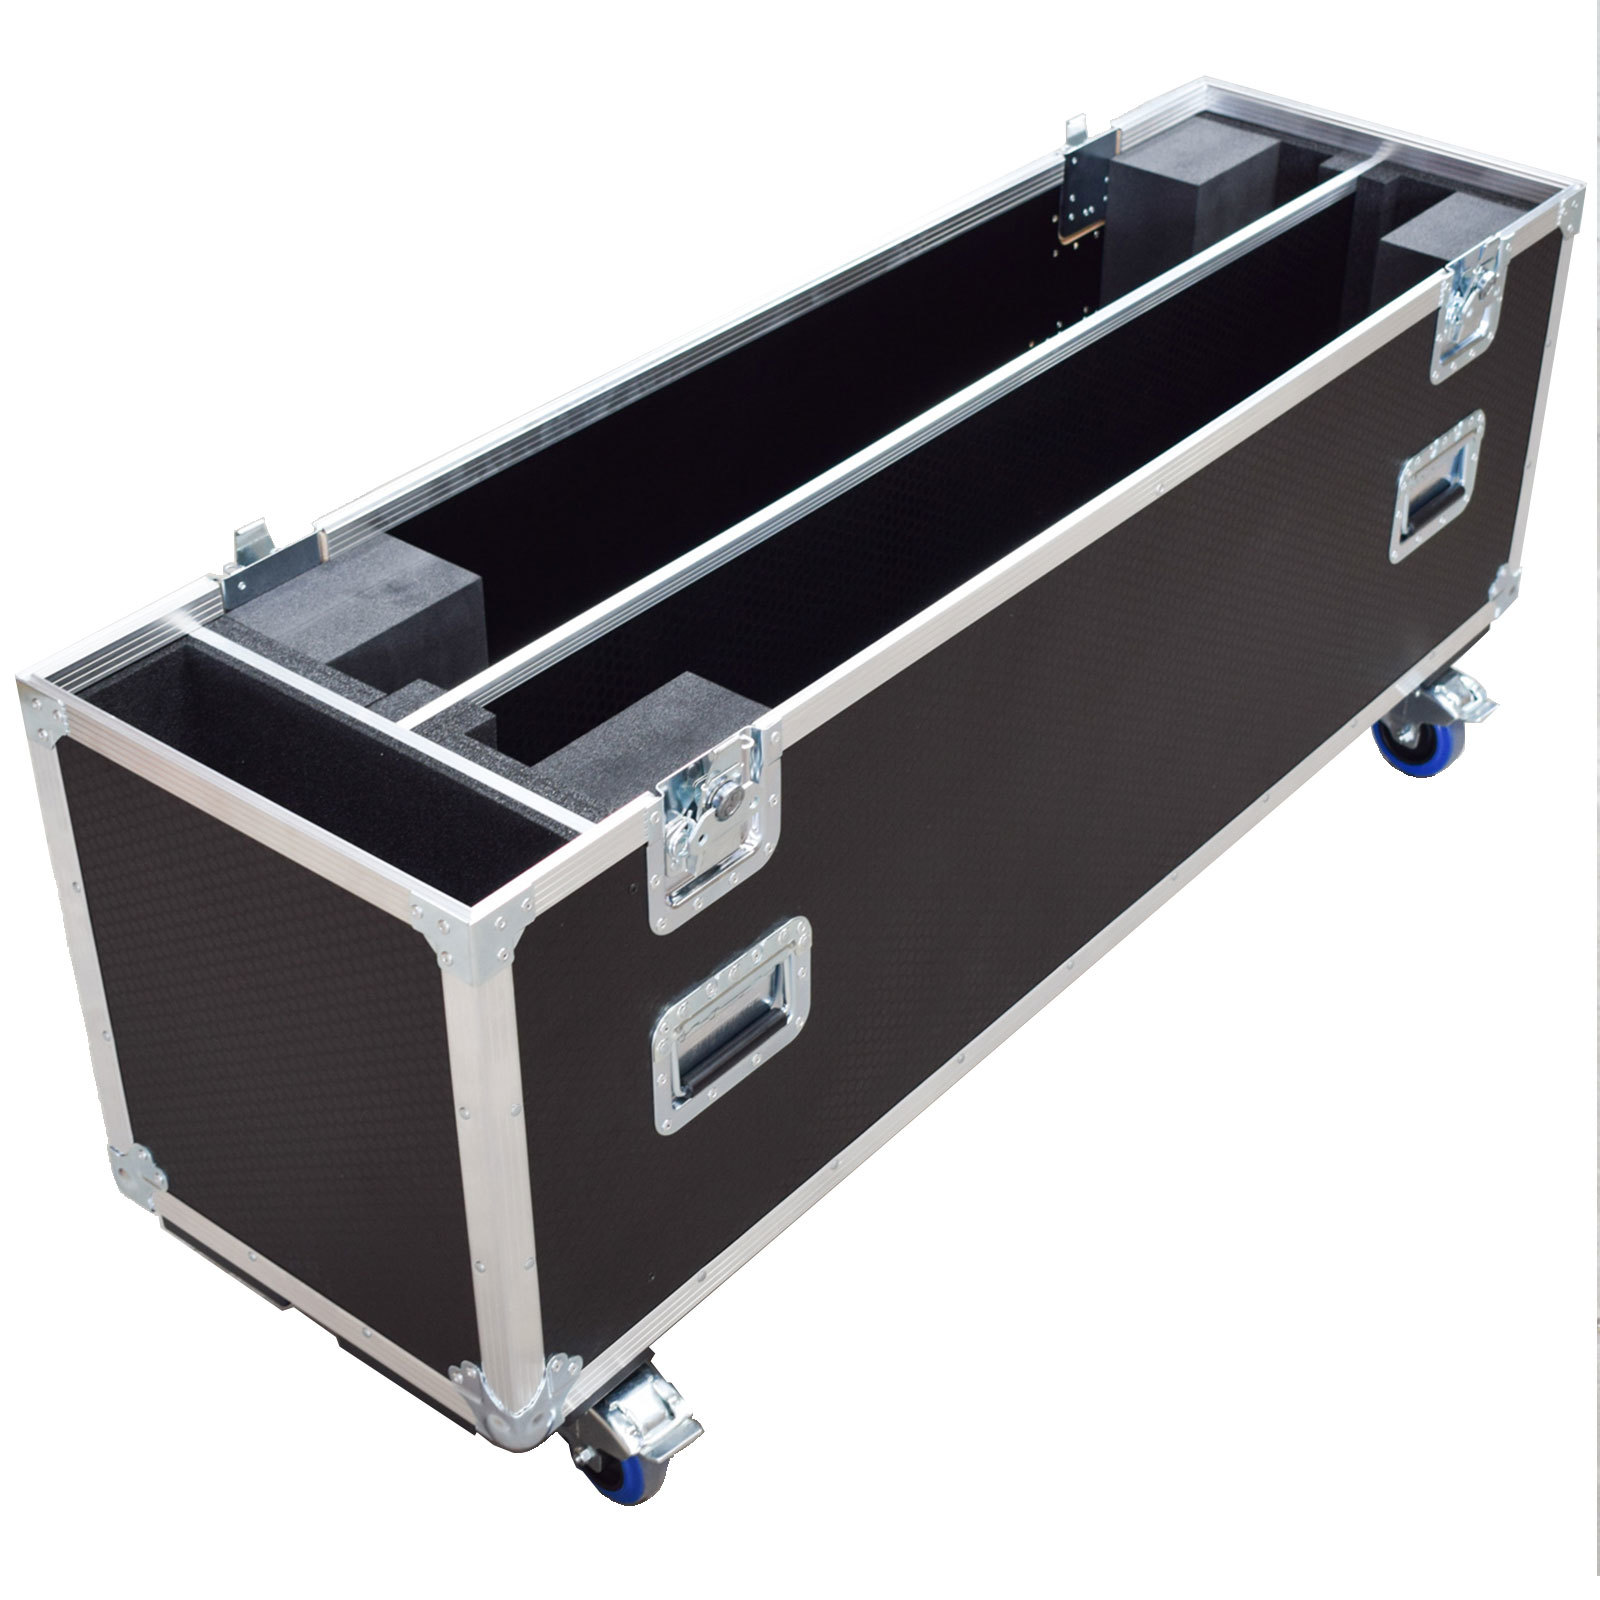 42 Plasma LCD TV Twin Flight case for Pioneer PDP-427DX 42inch